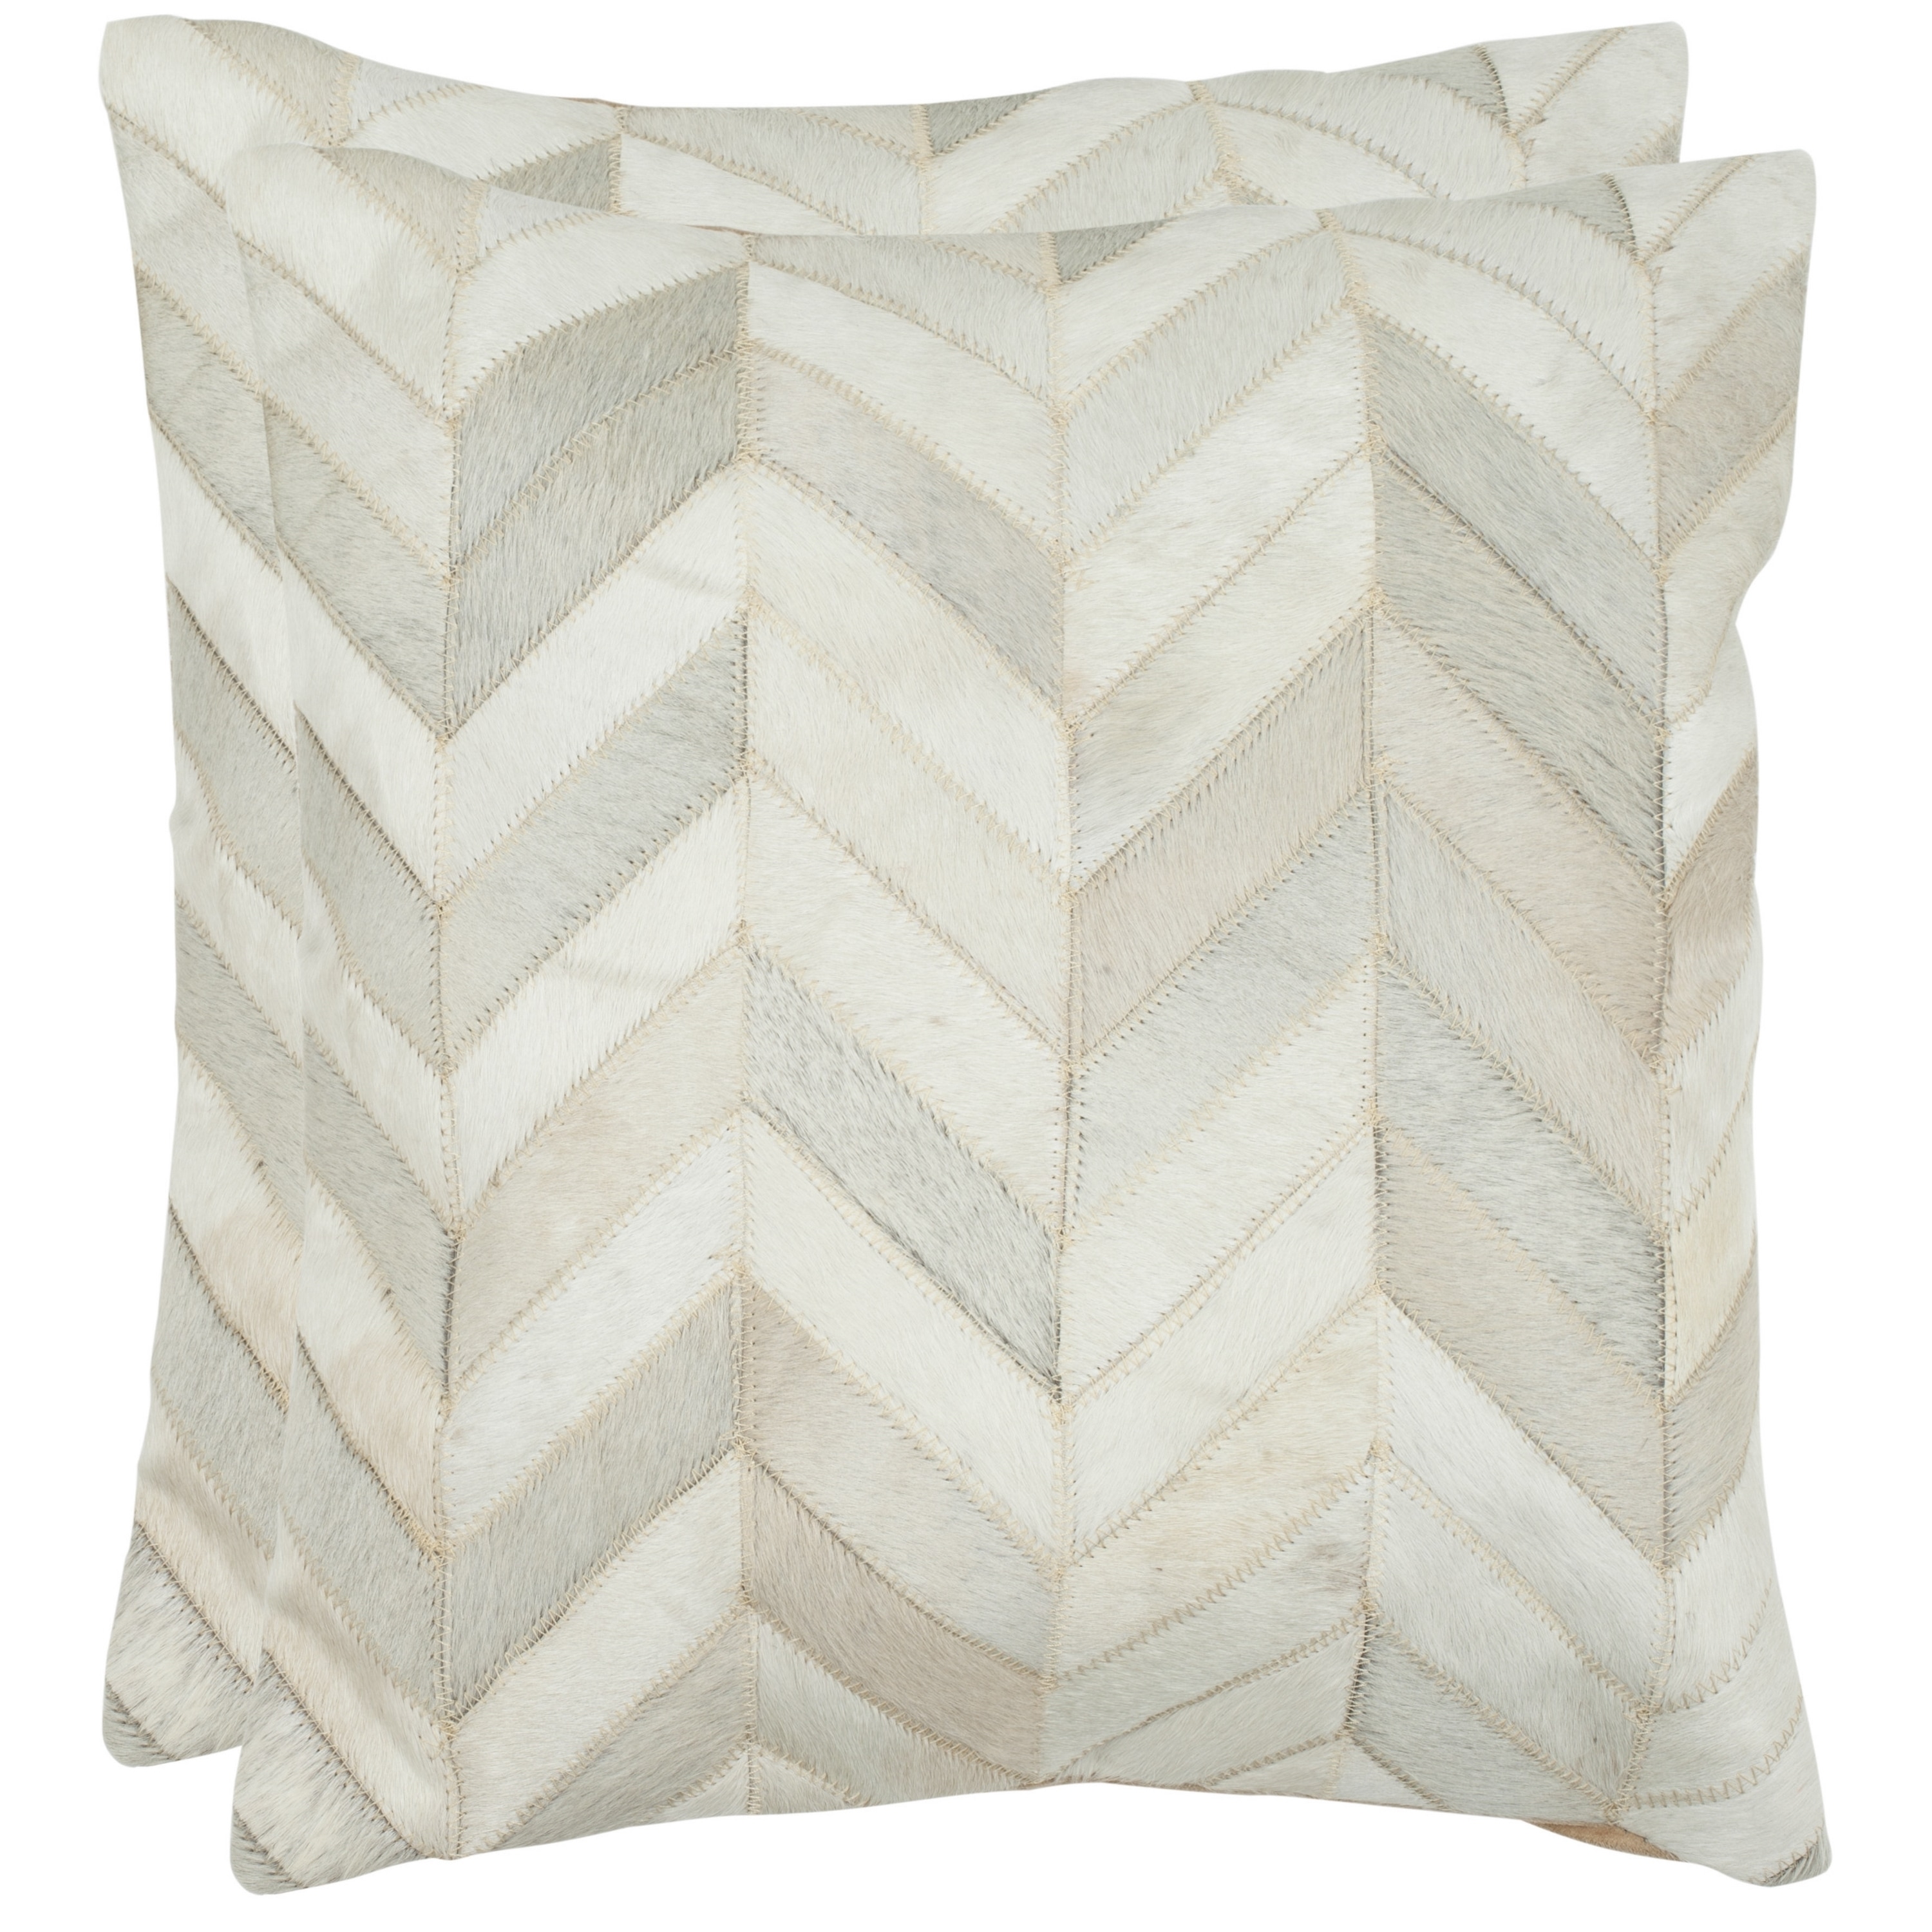 Safavieh Marley Multi White 18 Inch Square Decorative Throw Pillows Set Of 2